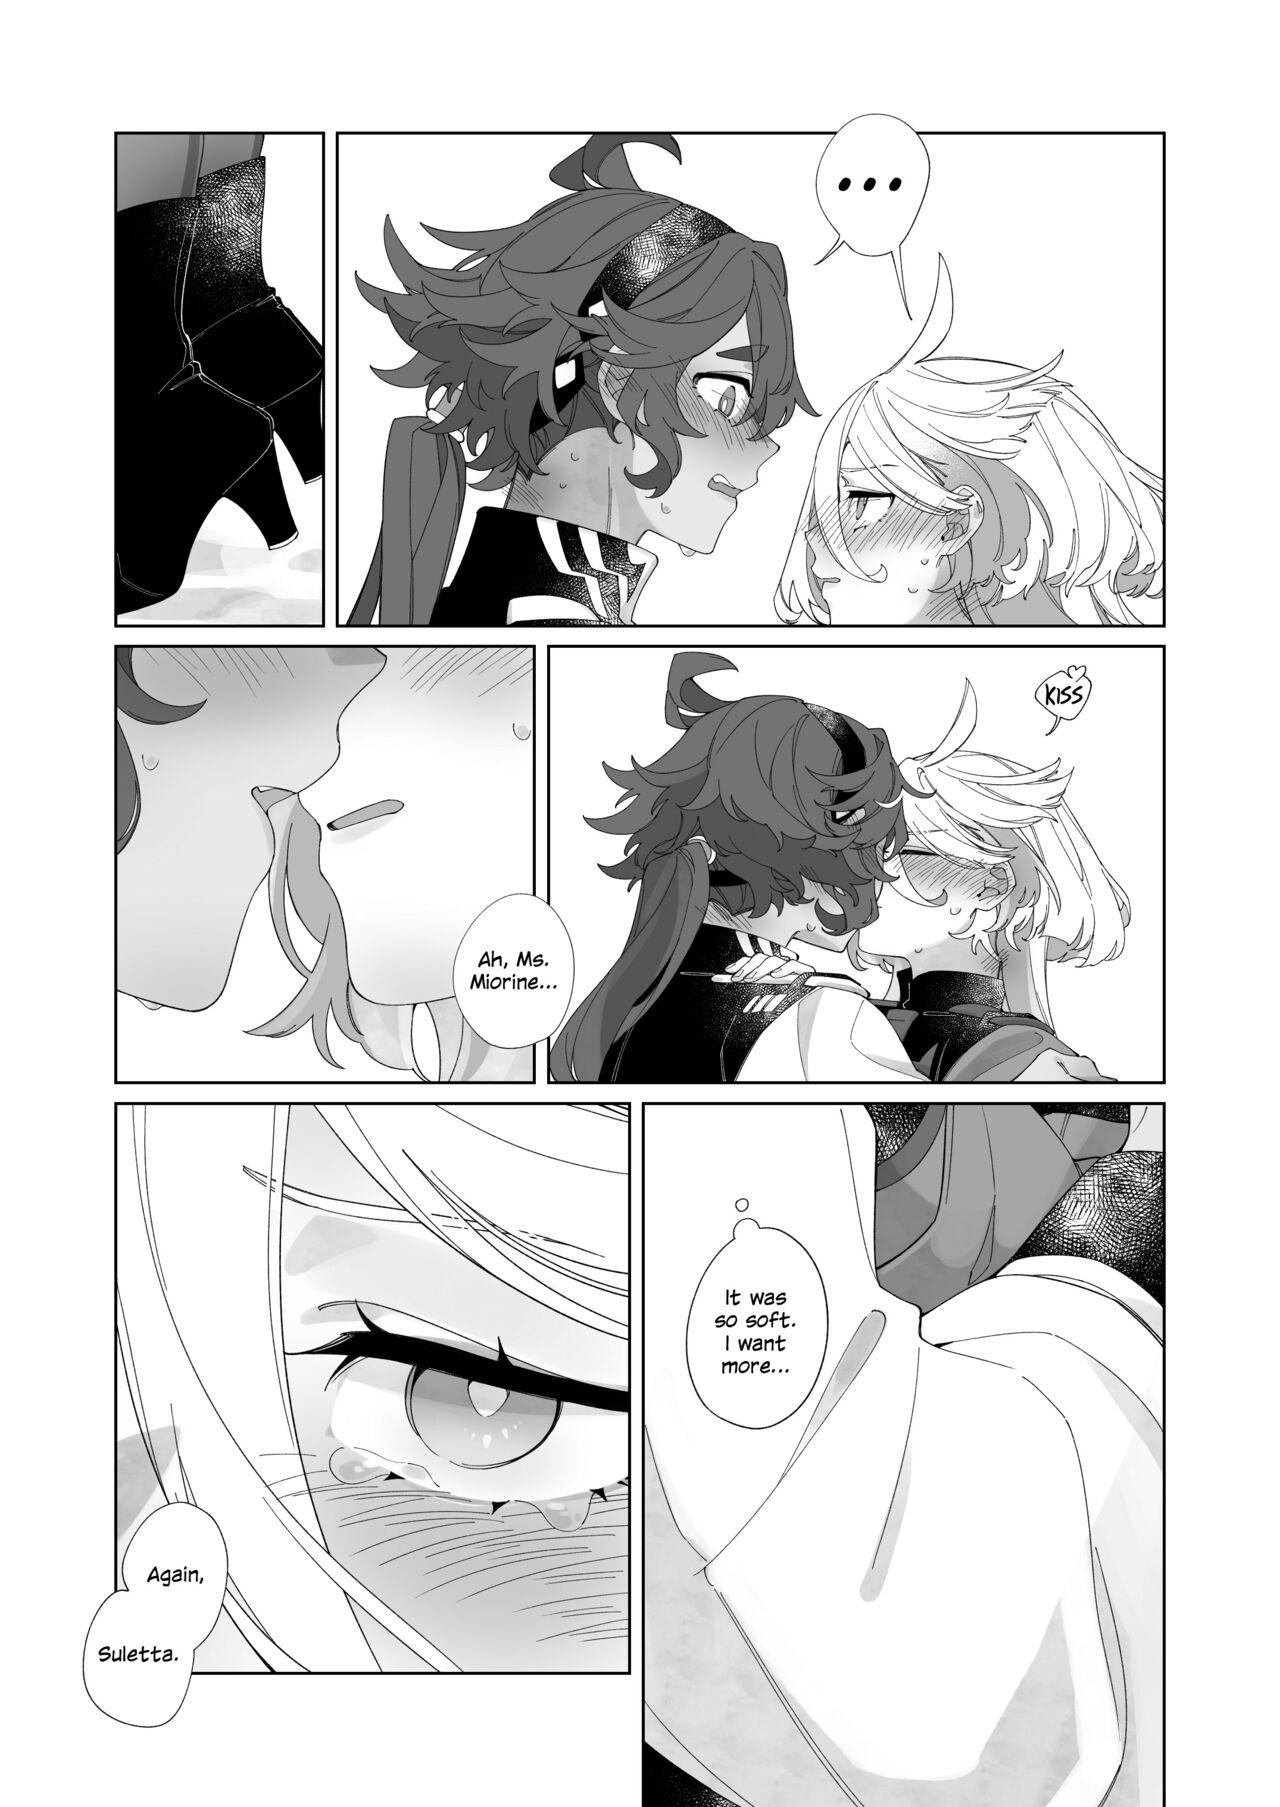 Hardcore Gay Kiss no Ato Nani ga Shitai? | After Kissing, What Else Do You Want to Do? - Mobile suit gundam the witch from mercury HD - Page 6